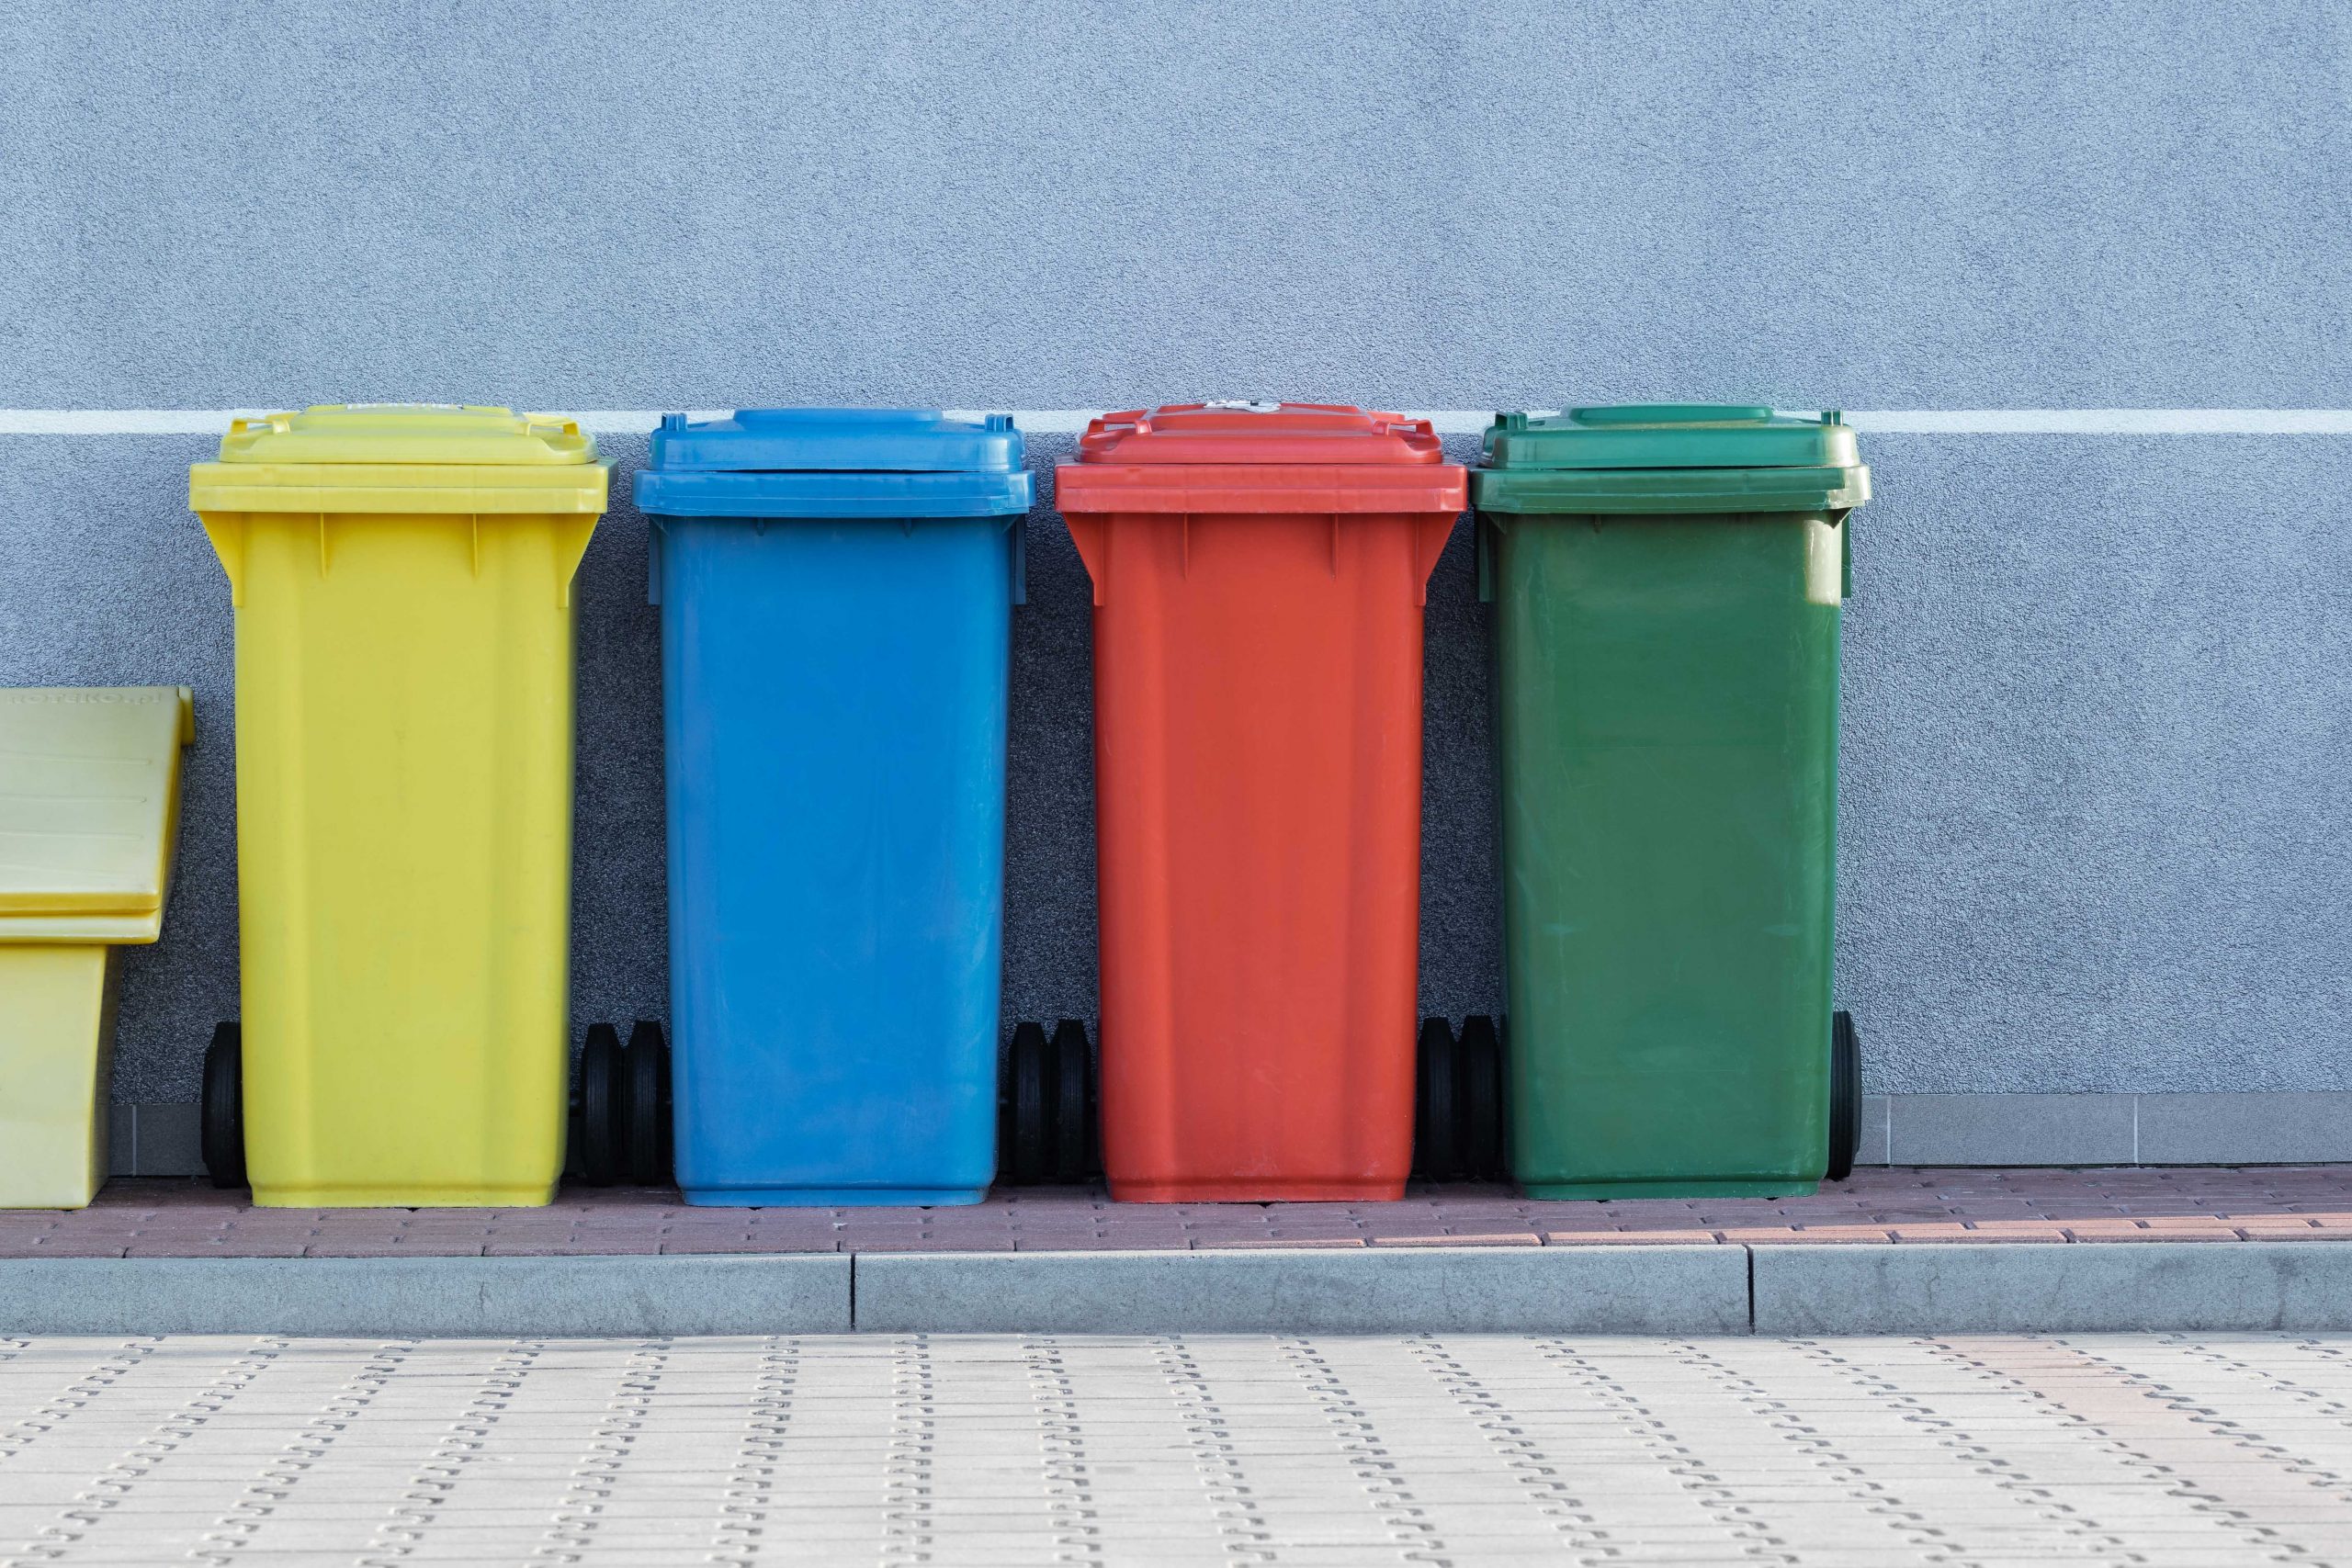 Orange Pilots An IoT-Based Waste Management Project in Mysłowice